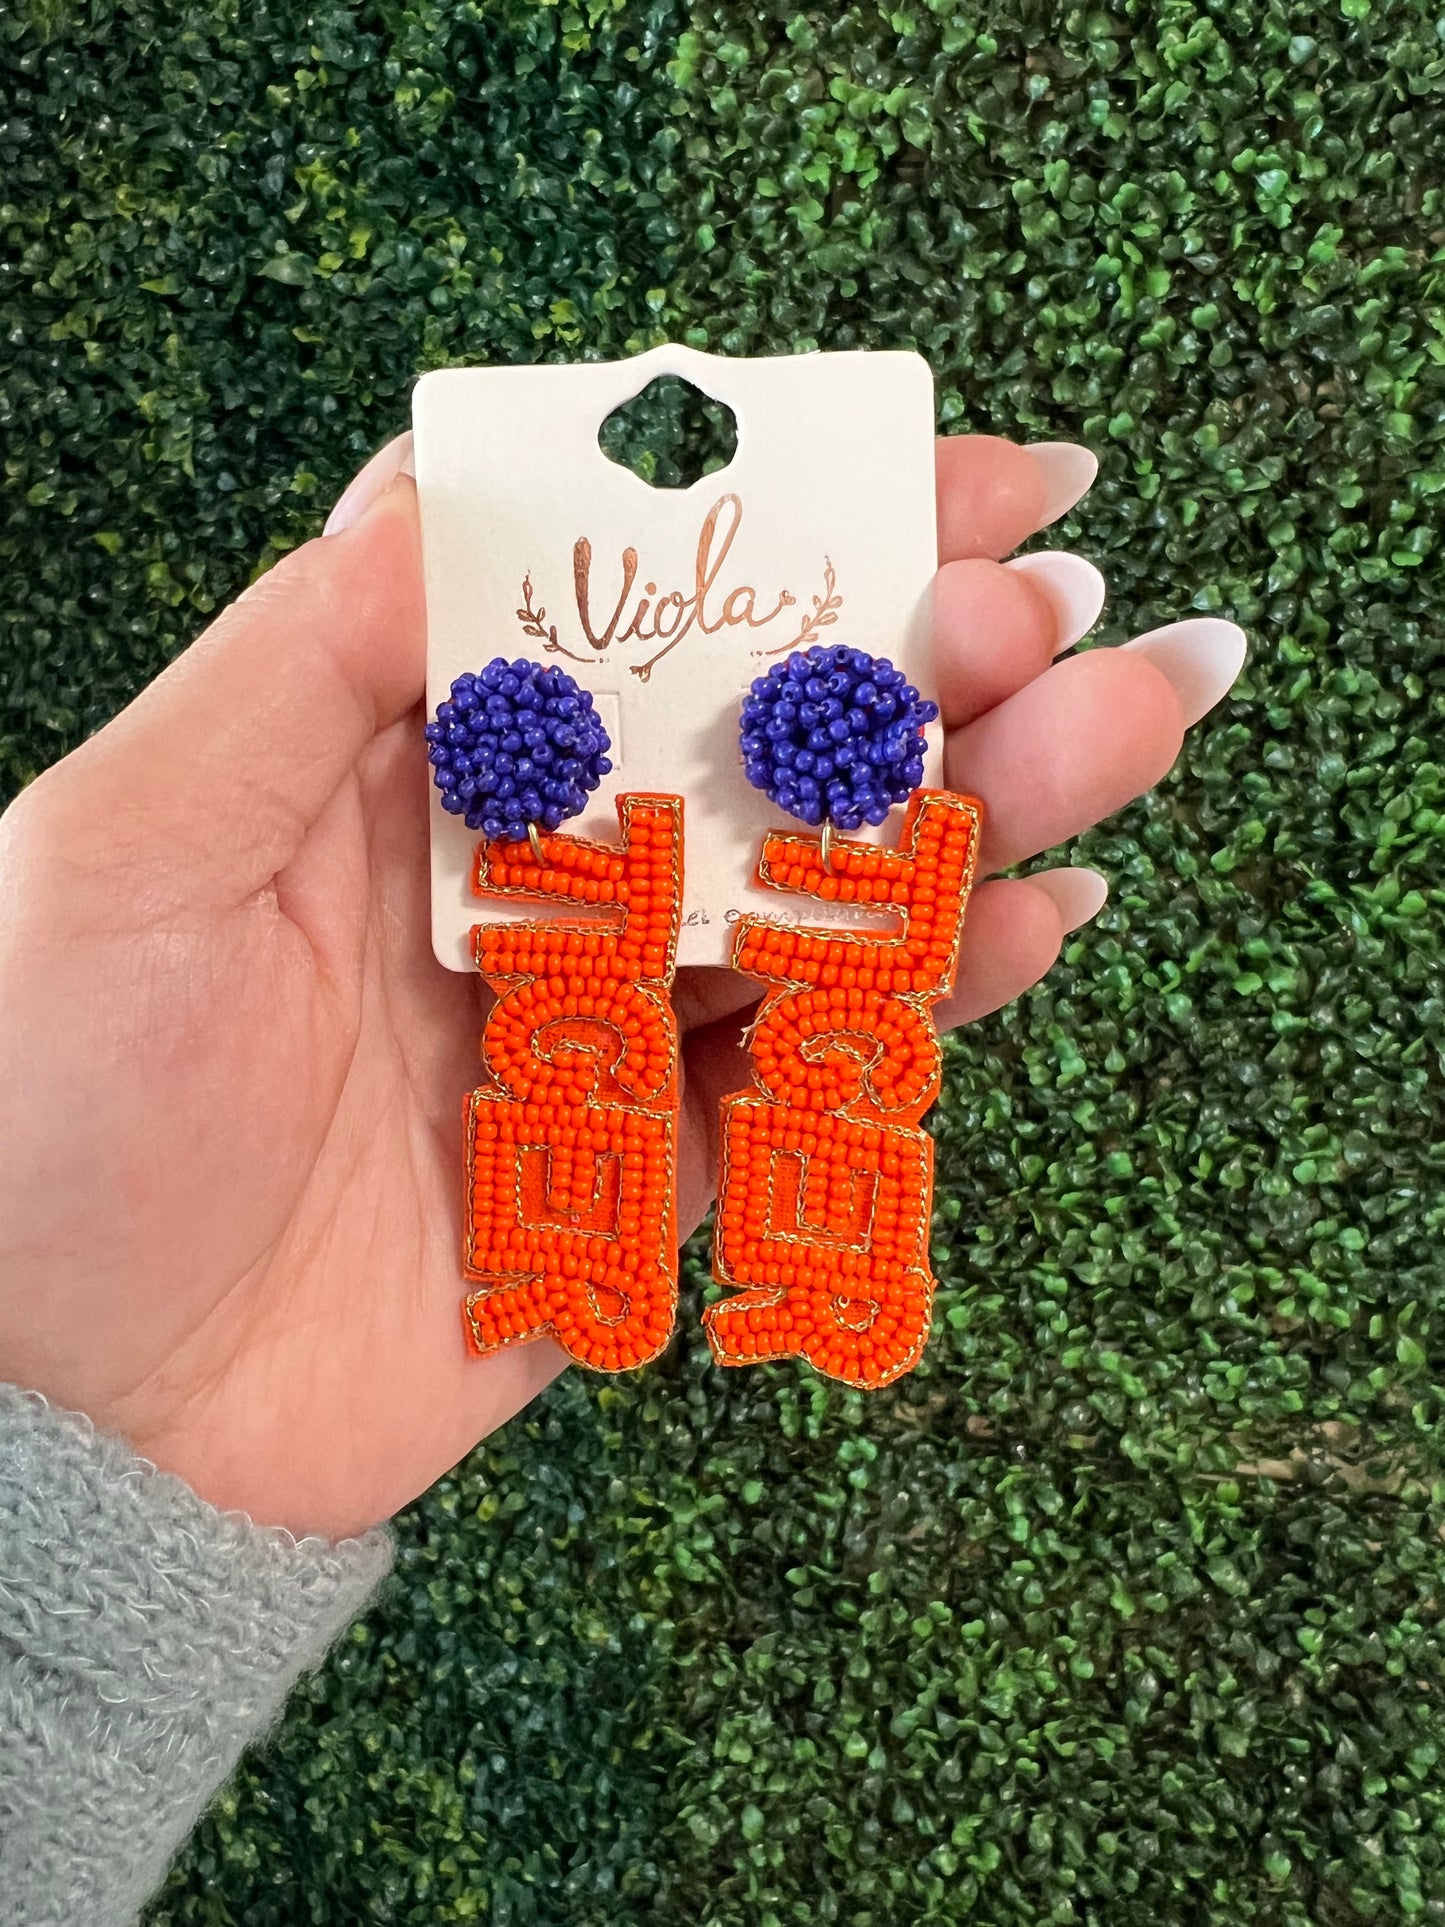 Every Game Day Earrings